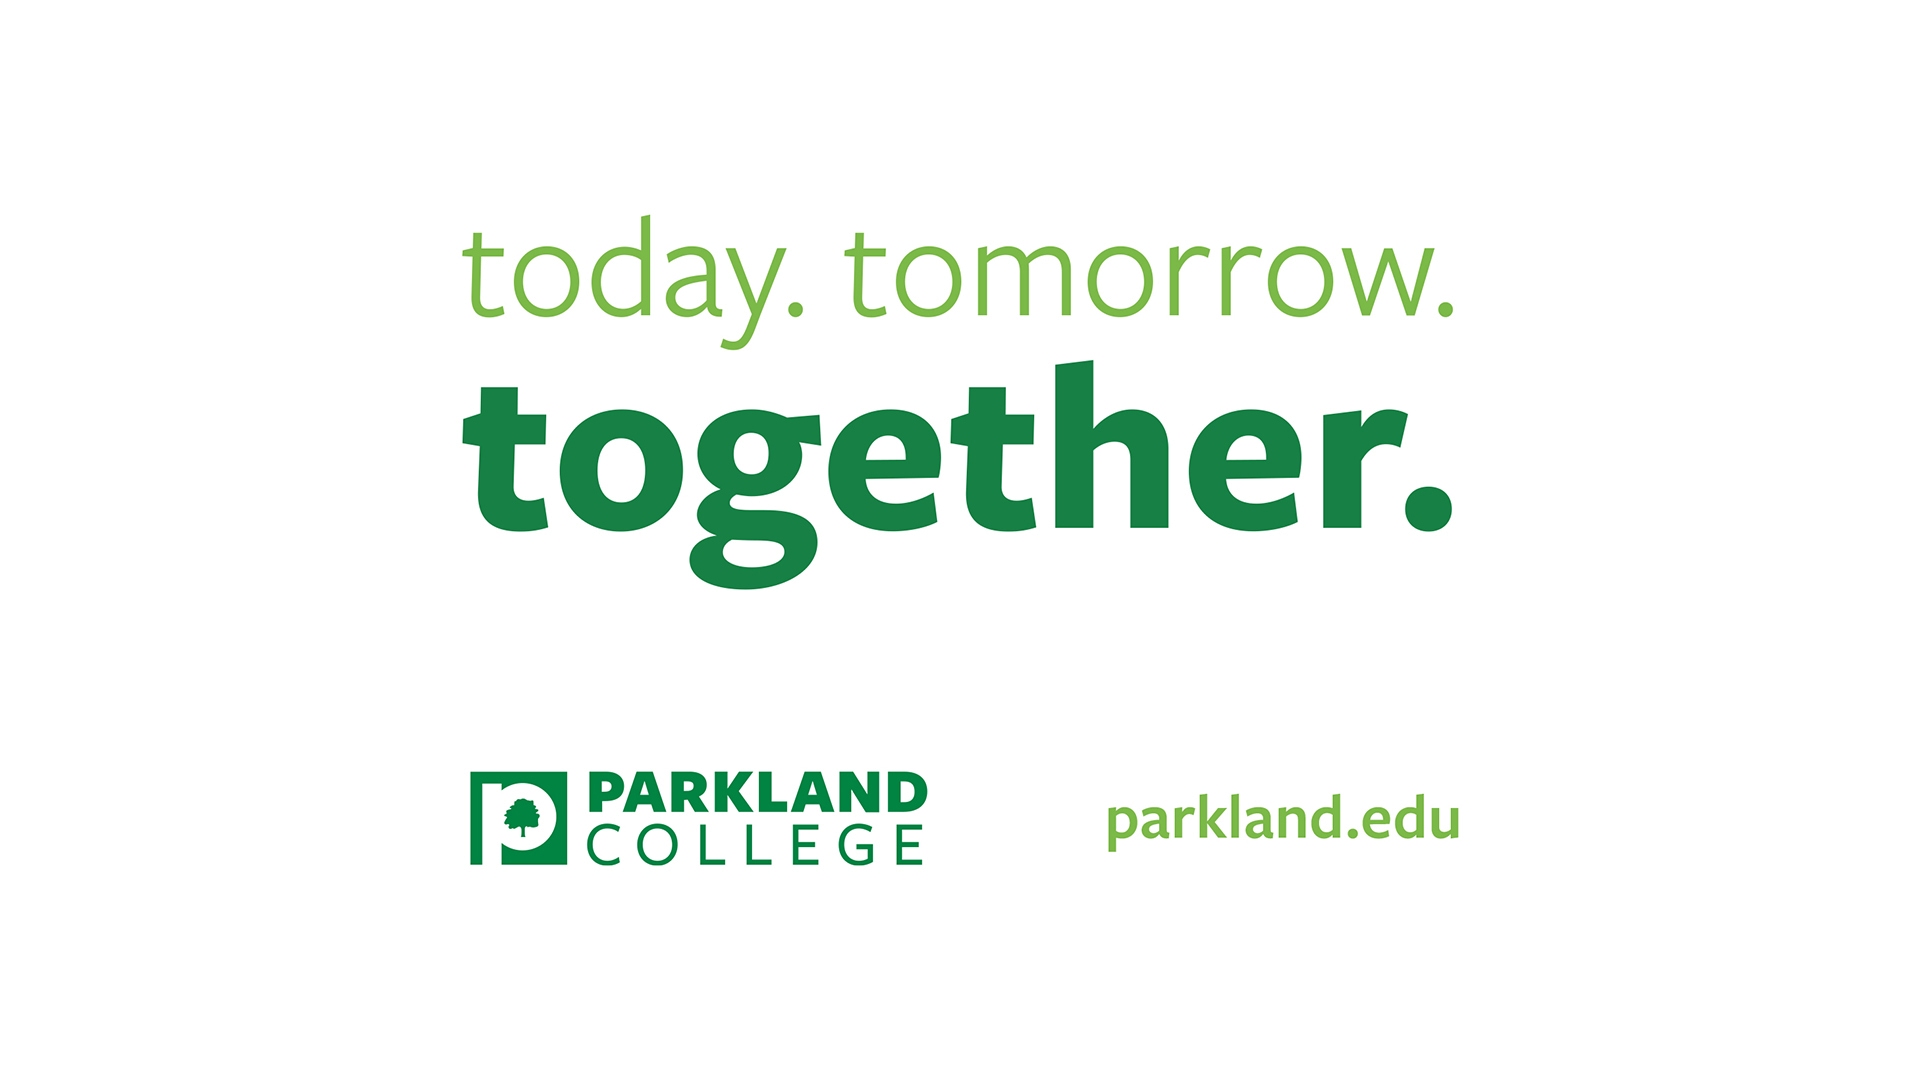 text today tomorrow together with parkland logo on white